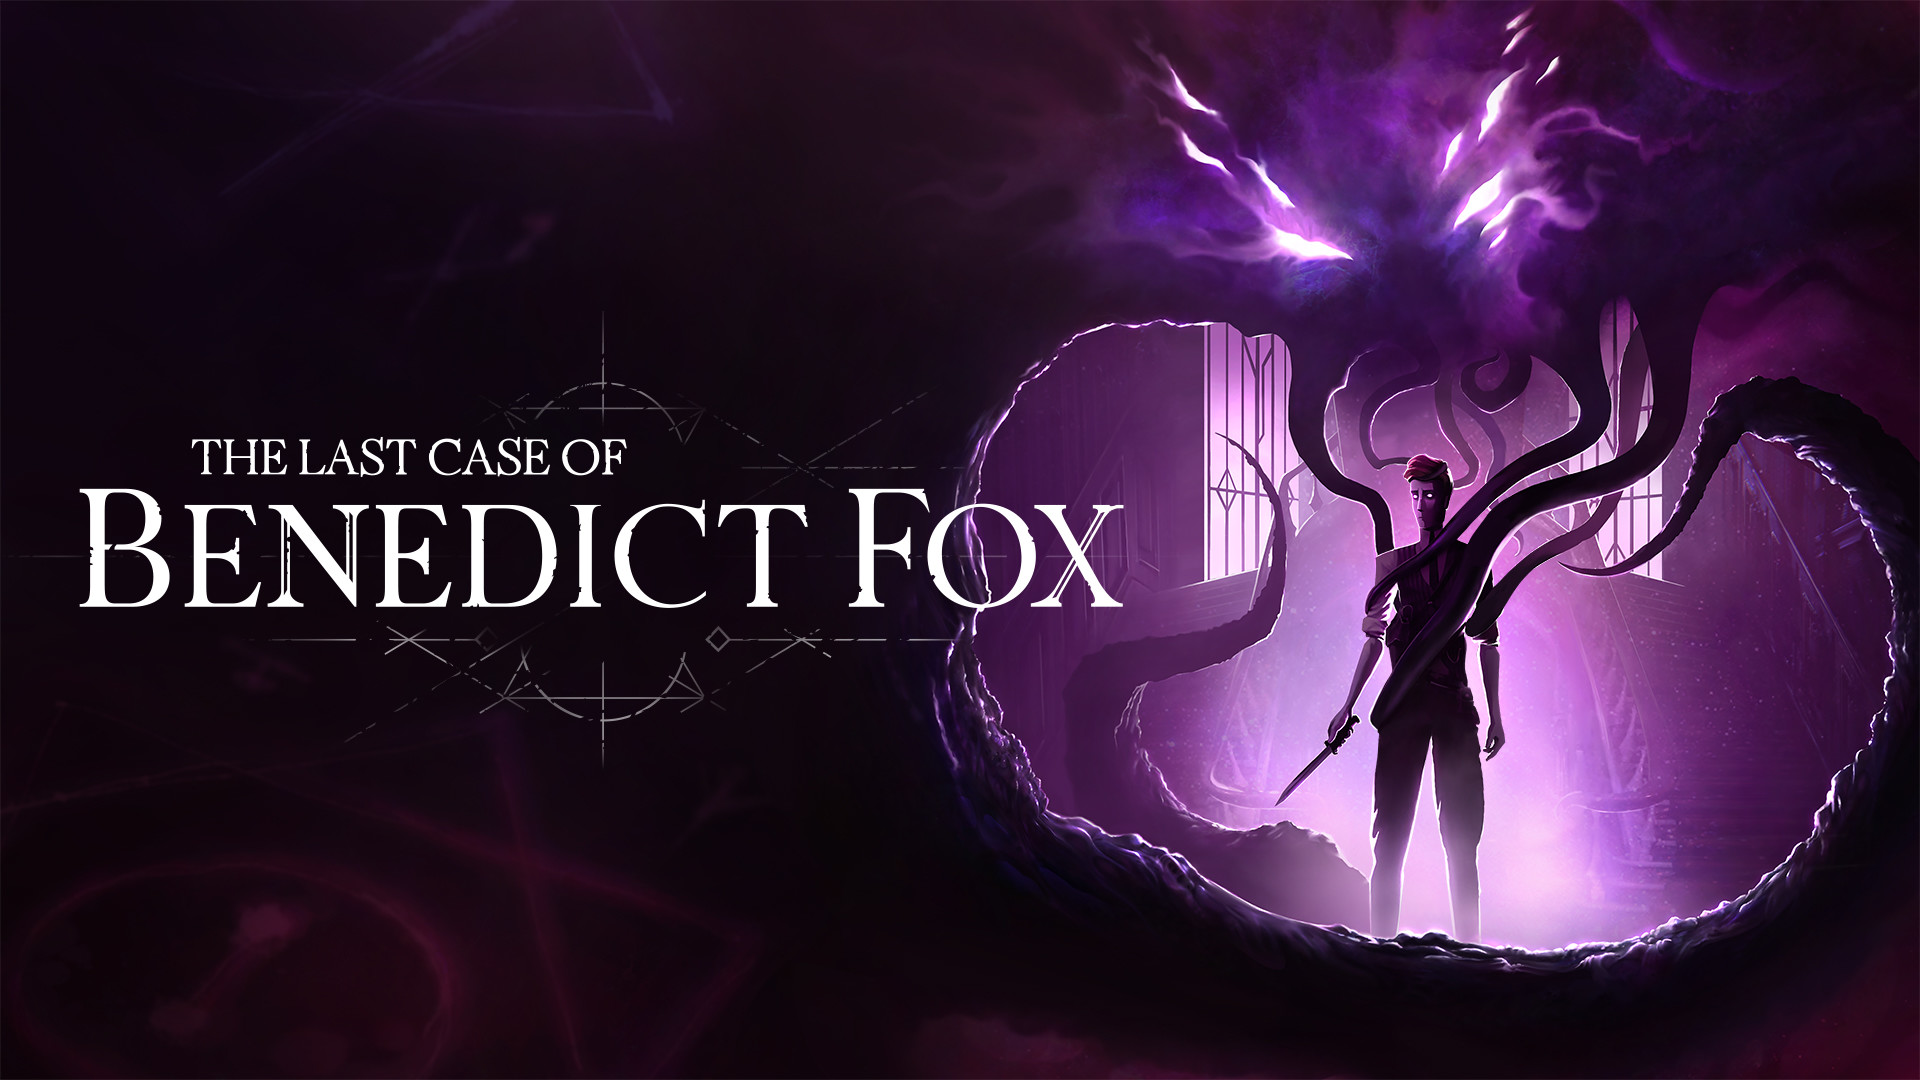 The Last Case of Benedict Fox was announced with its new trailer at the Xbox and Bethesda showcase